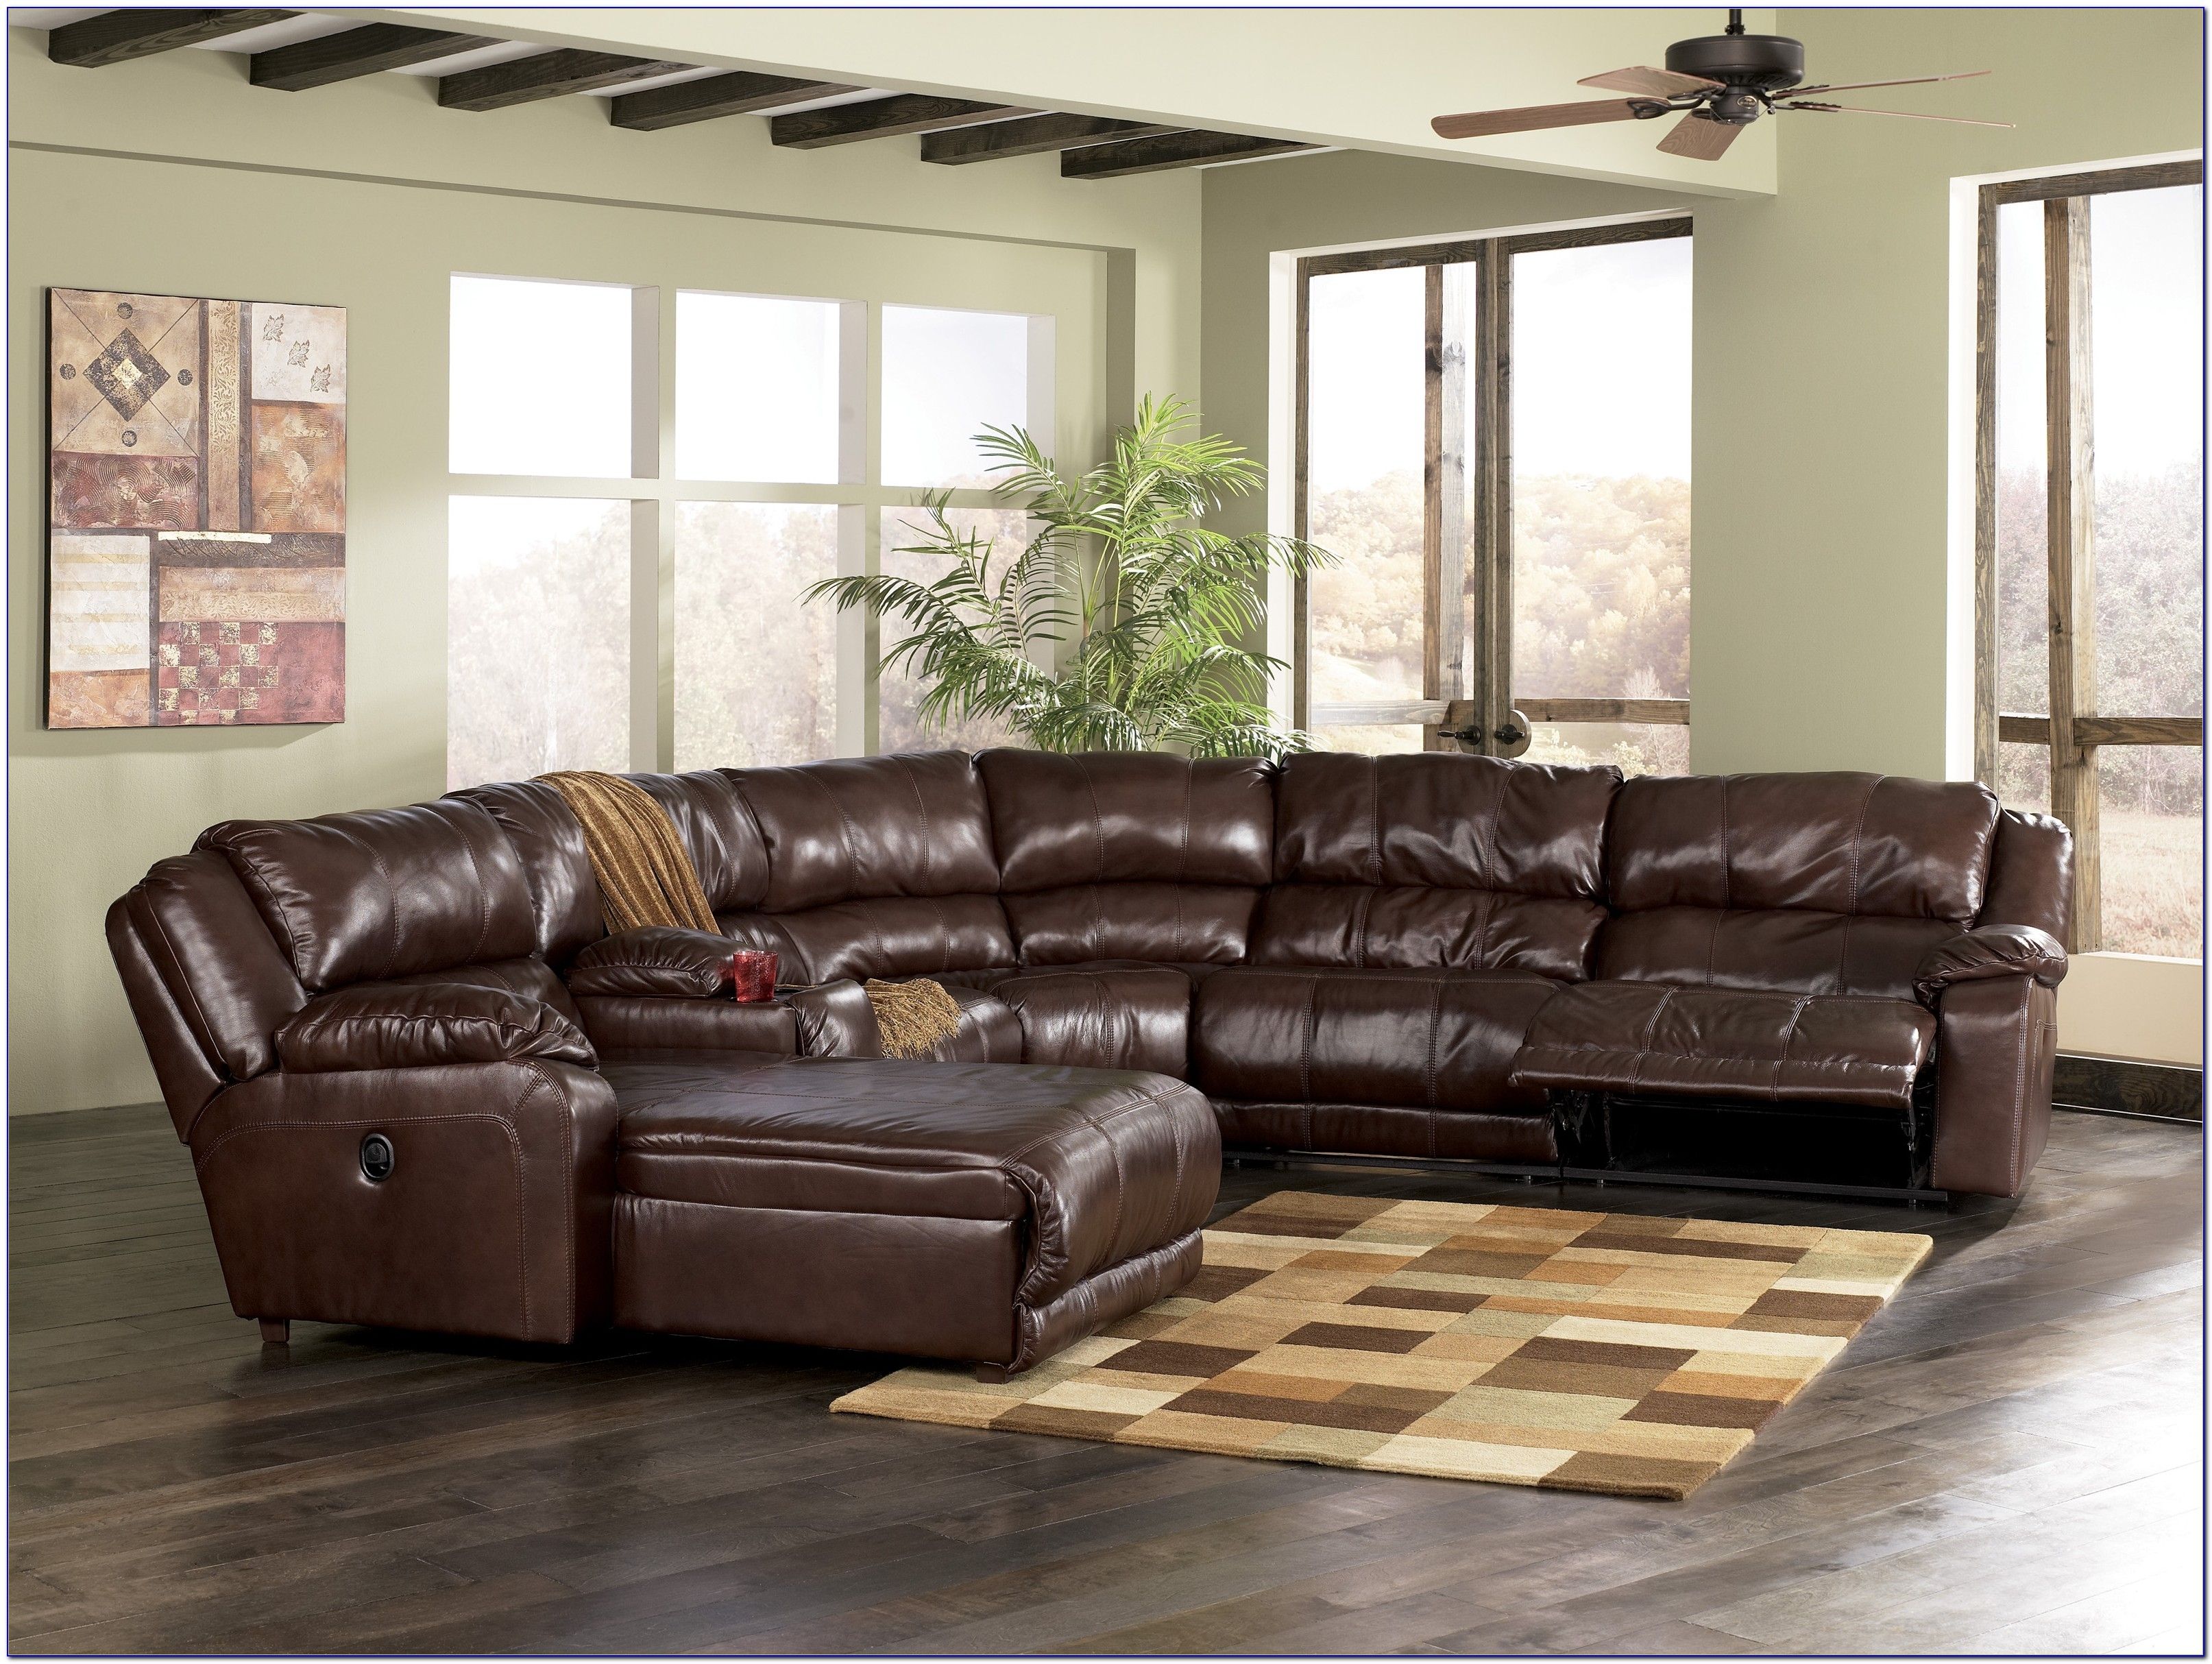 Inspirational High Back Sectional Sofas 67 About Remodel Queen Inside Sectional Sofas With High Backs (Photo 8 of 10)